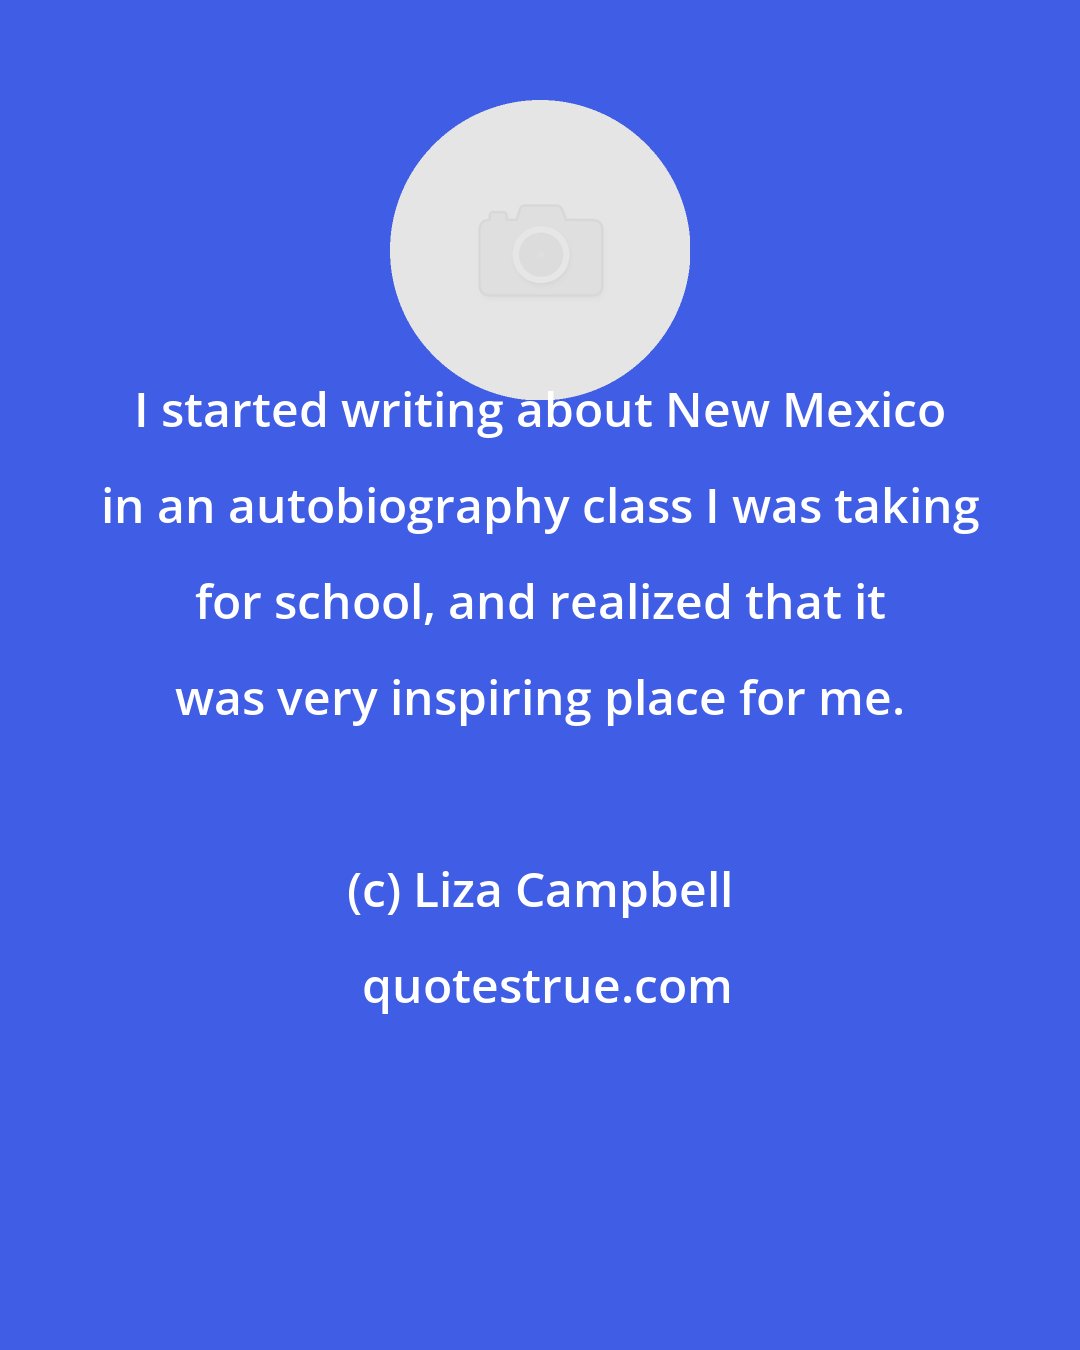 Liza Campbell: I started writing about New Mexico in an autobiography class I was taking for school, and realized that it was very inspiring place for me.